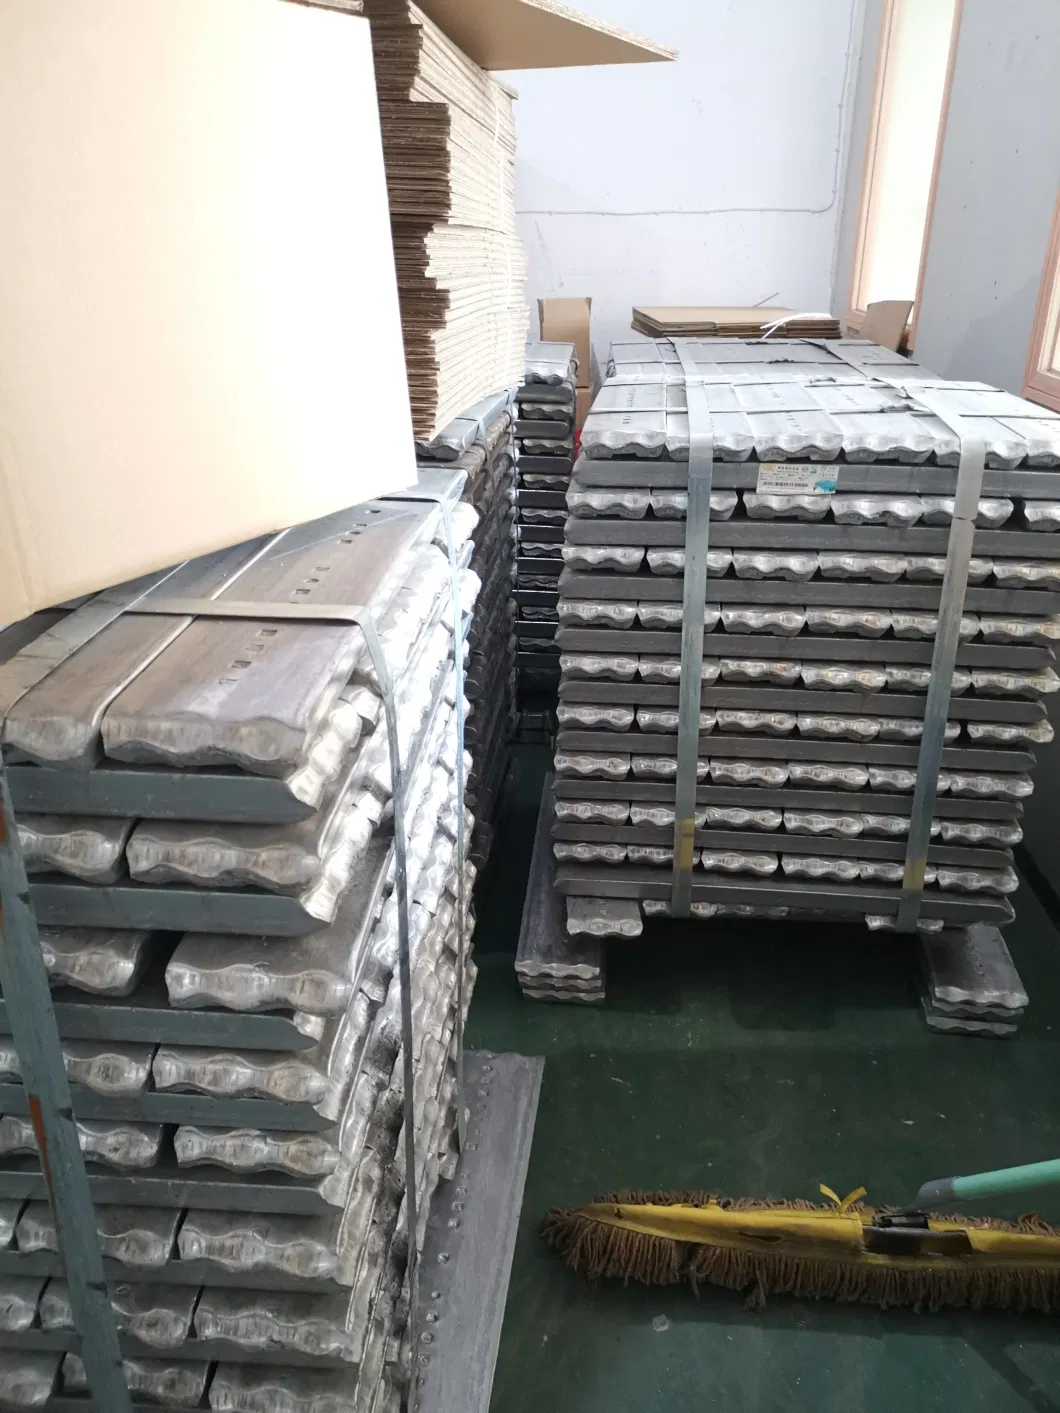 China Sale Factory Price High Quality Cast Aluminum Alloy